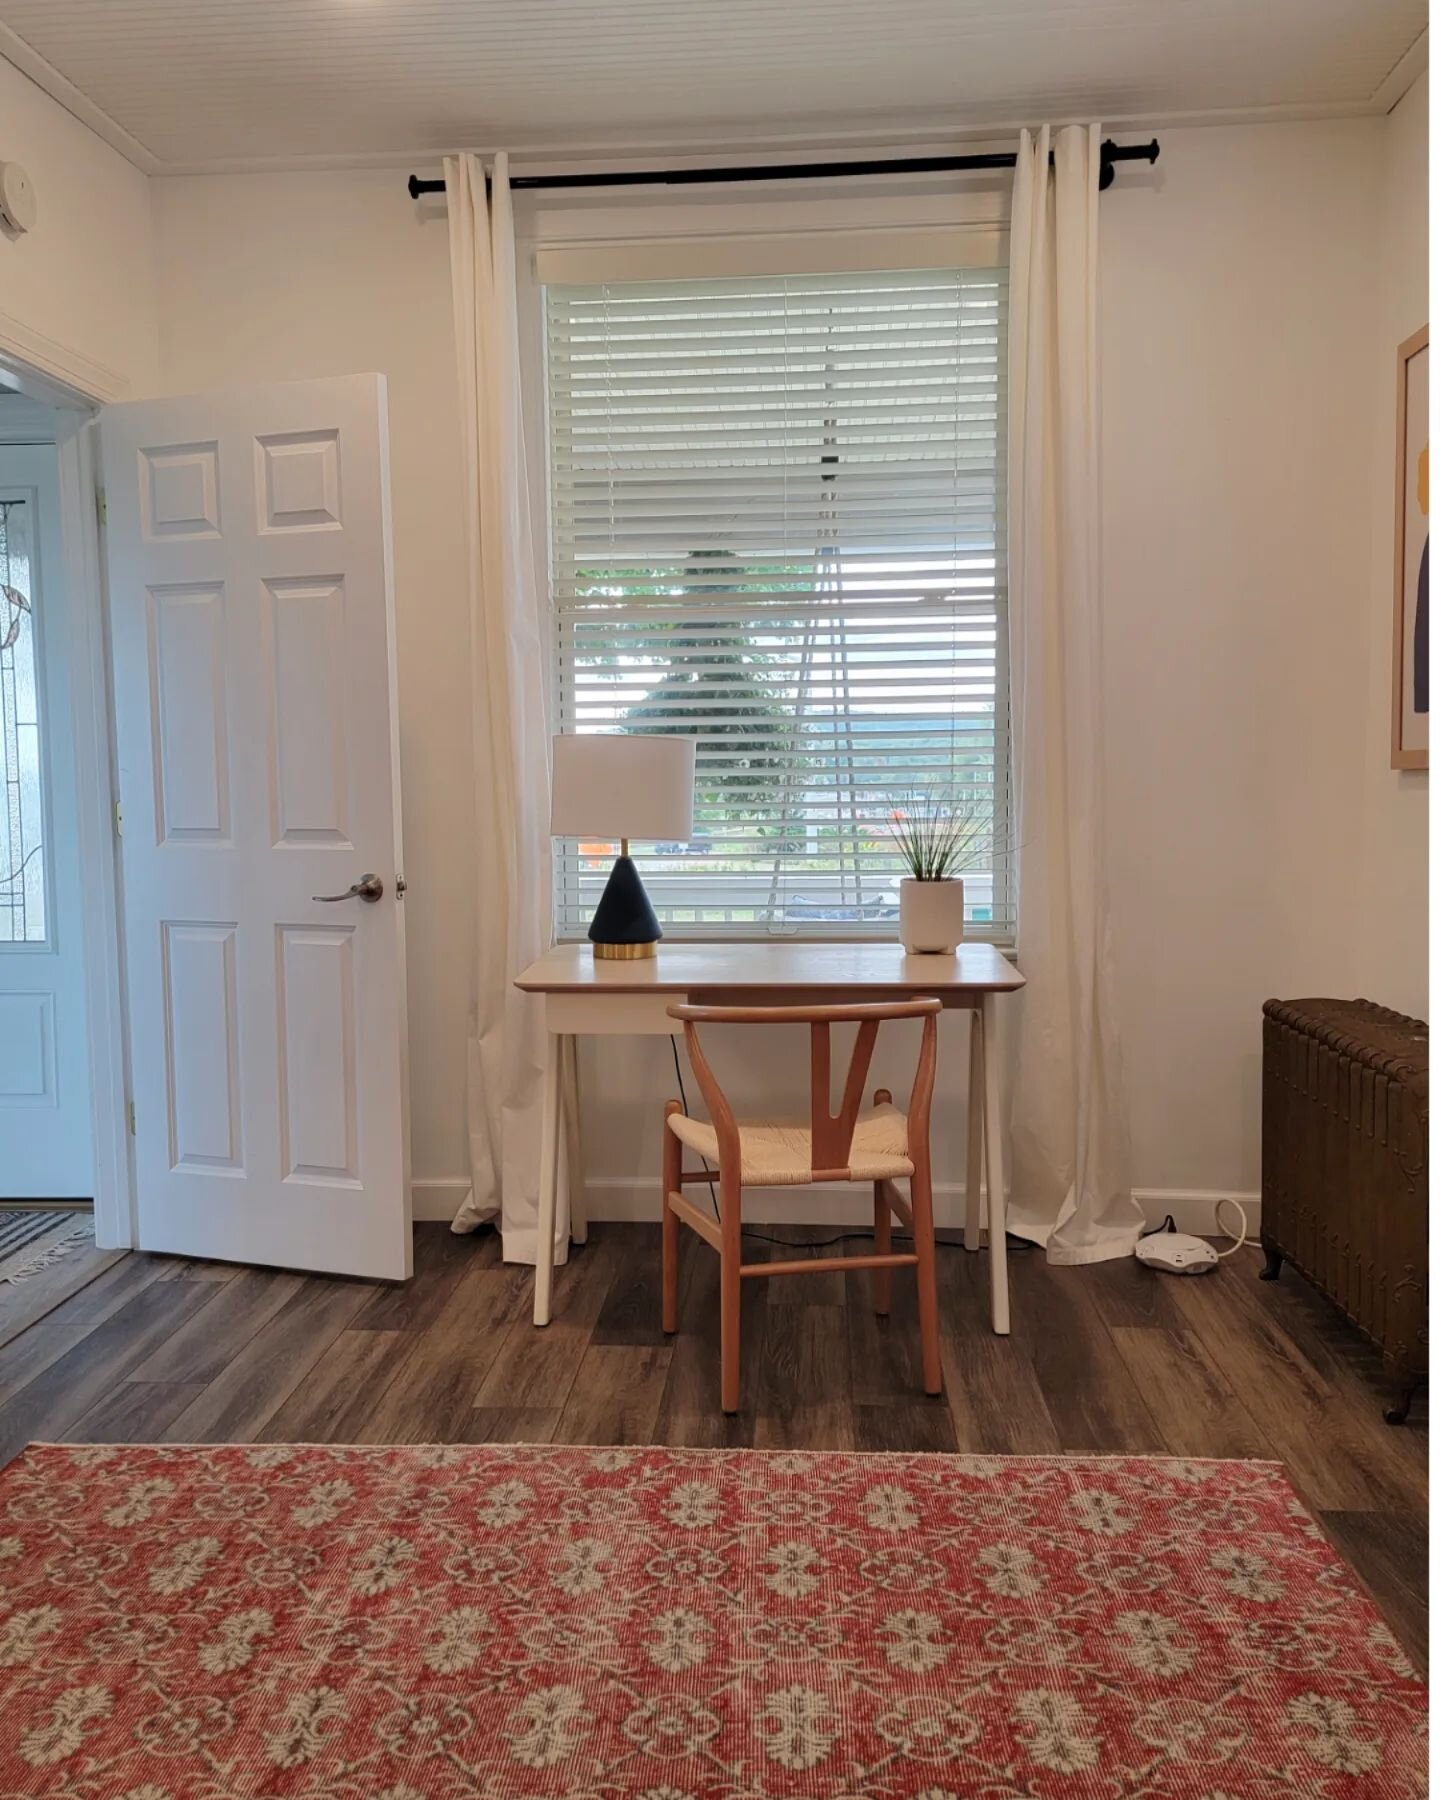 The queen bedroom has a window side desk space - perfect for working remotely! 

.
.
.
.
.
.
.
.
.

#airbnb #airbnbhost #airbnbexperience #marquettemichigan #upnorth #lakesuperior #upperpeninsula #up #puremichigan #upperpeninsulamichigan #greatlakess